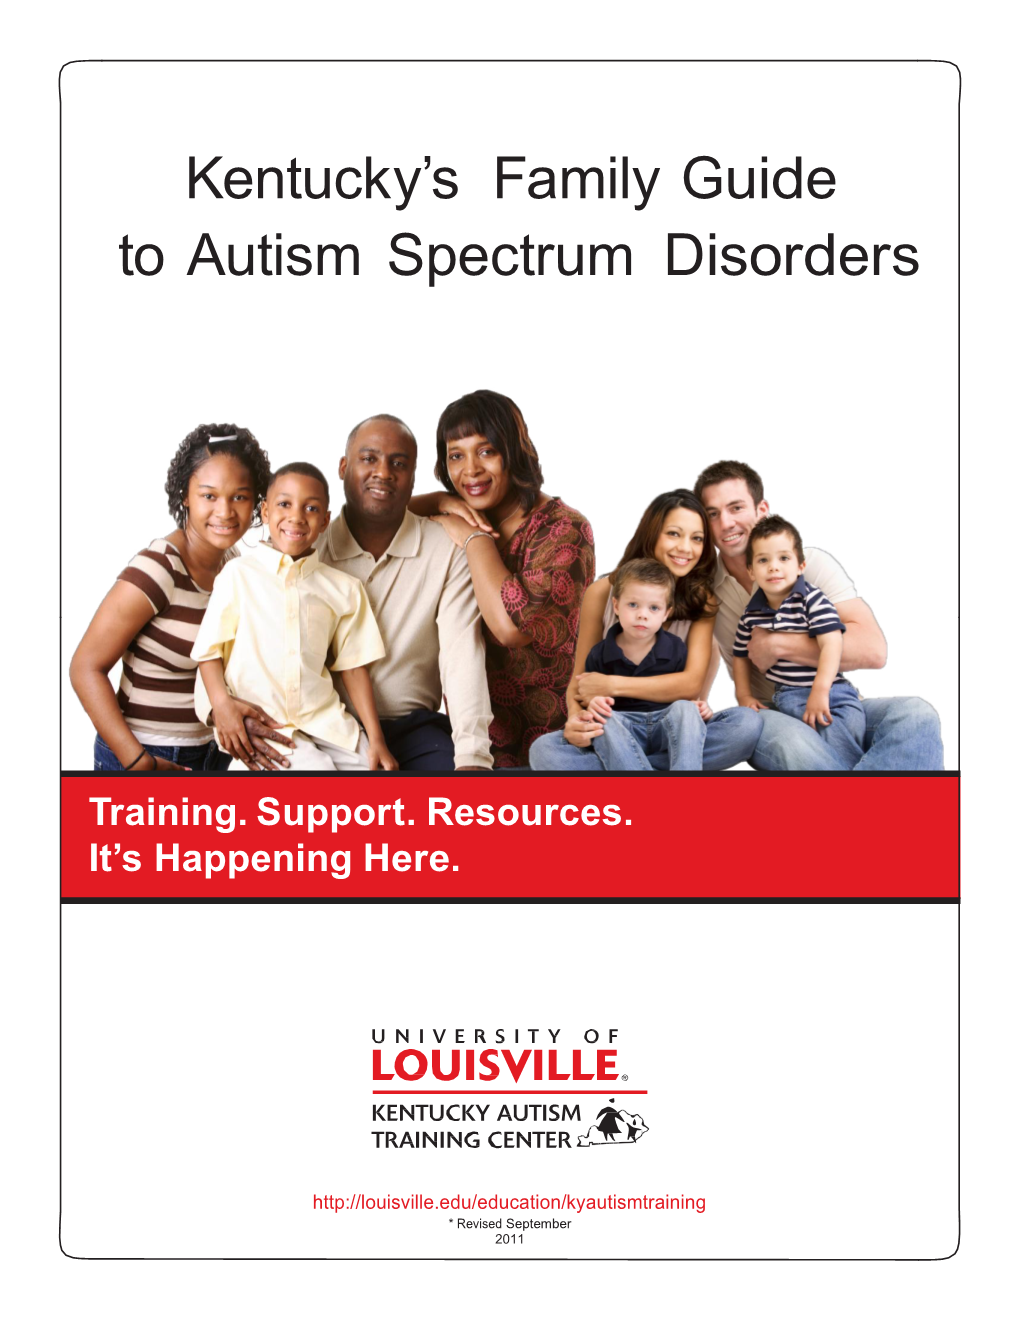 Kentucky's Family Guide to Autism Spectrum Disorders